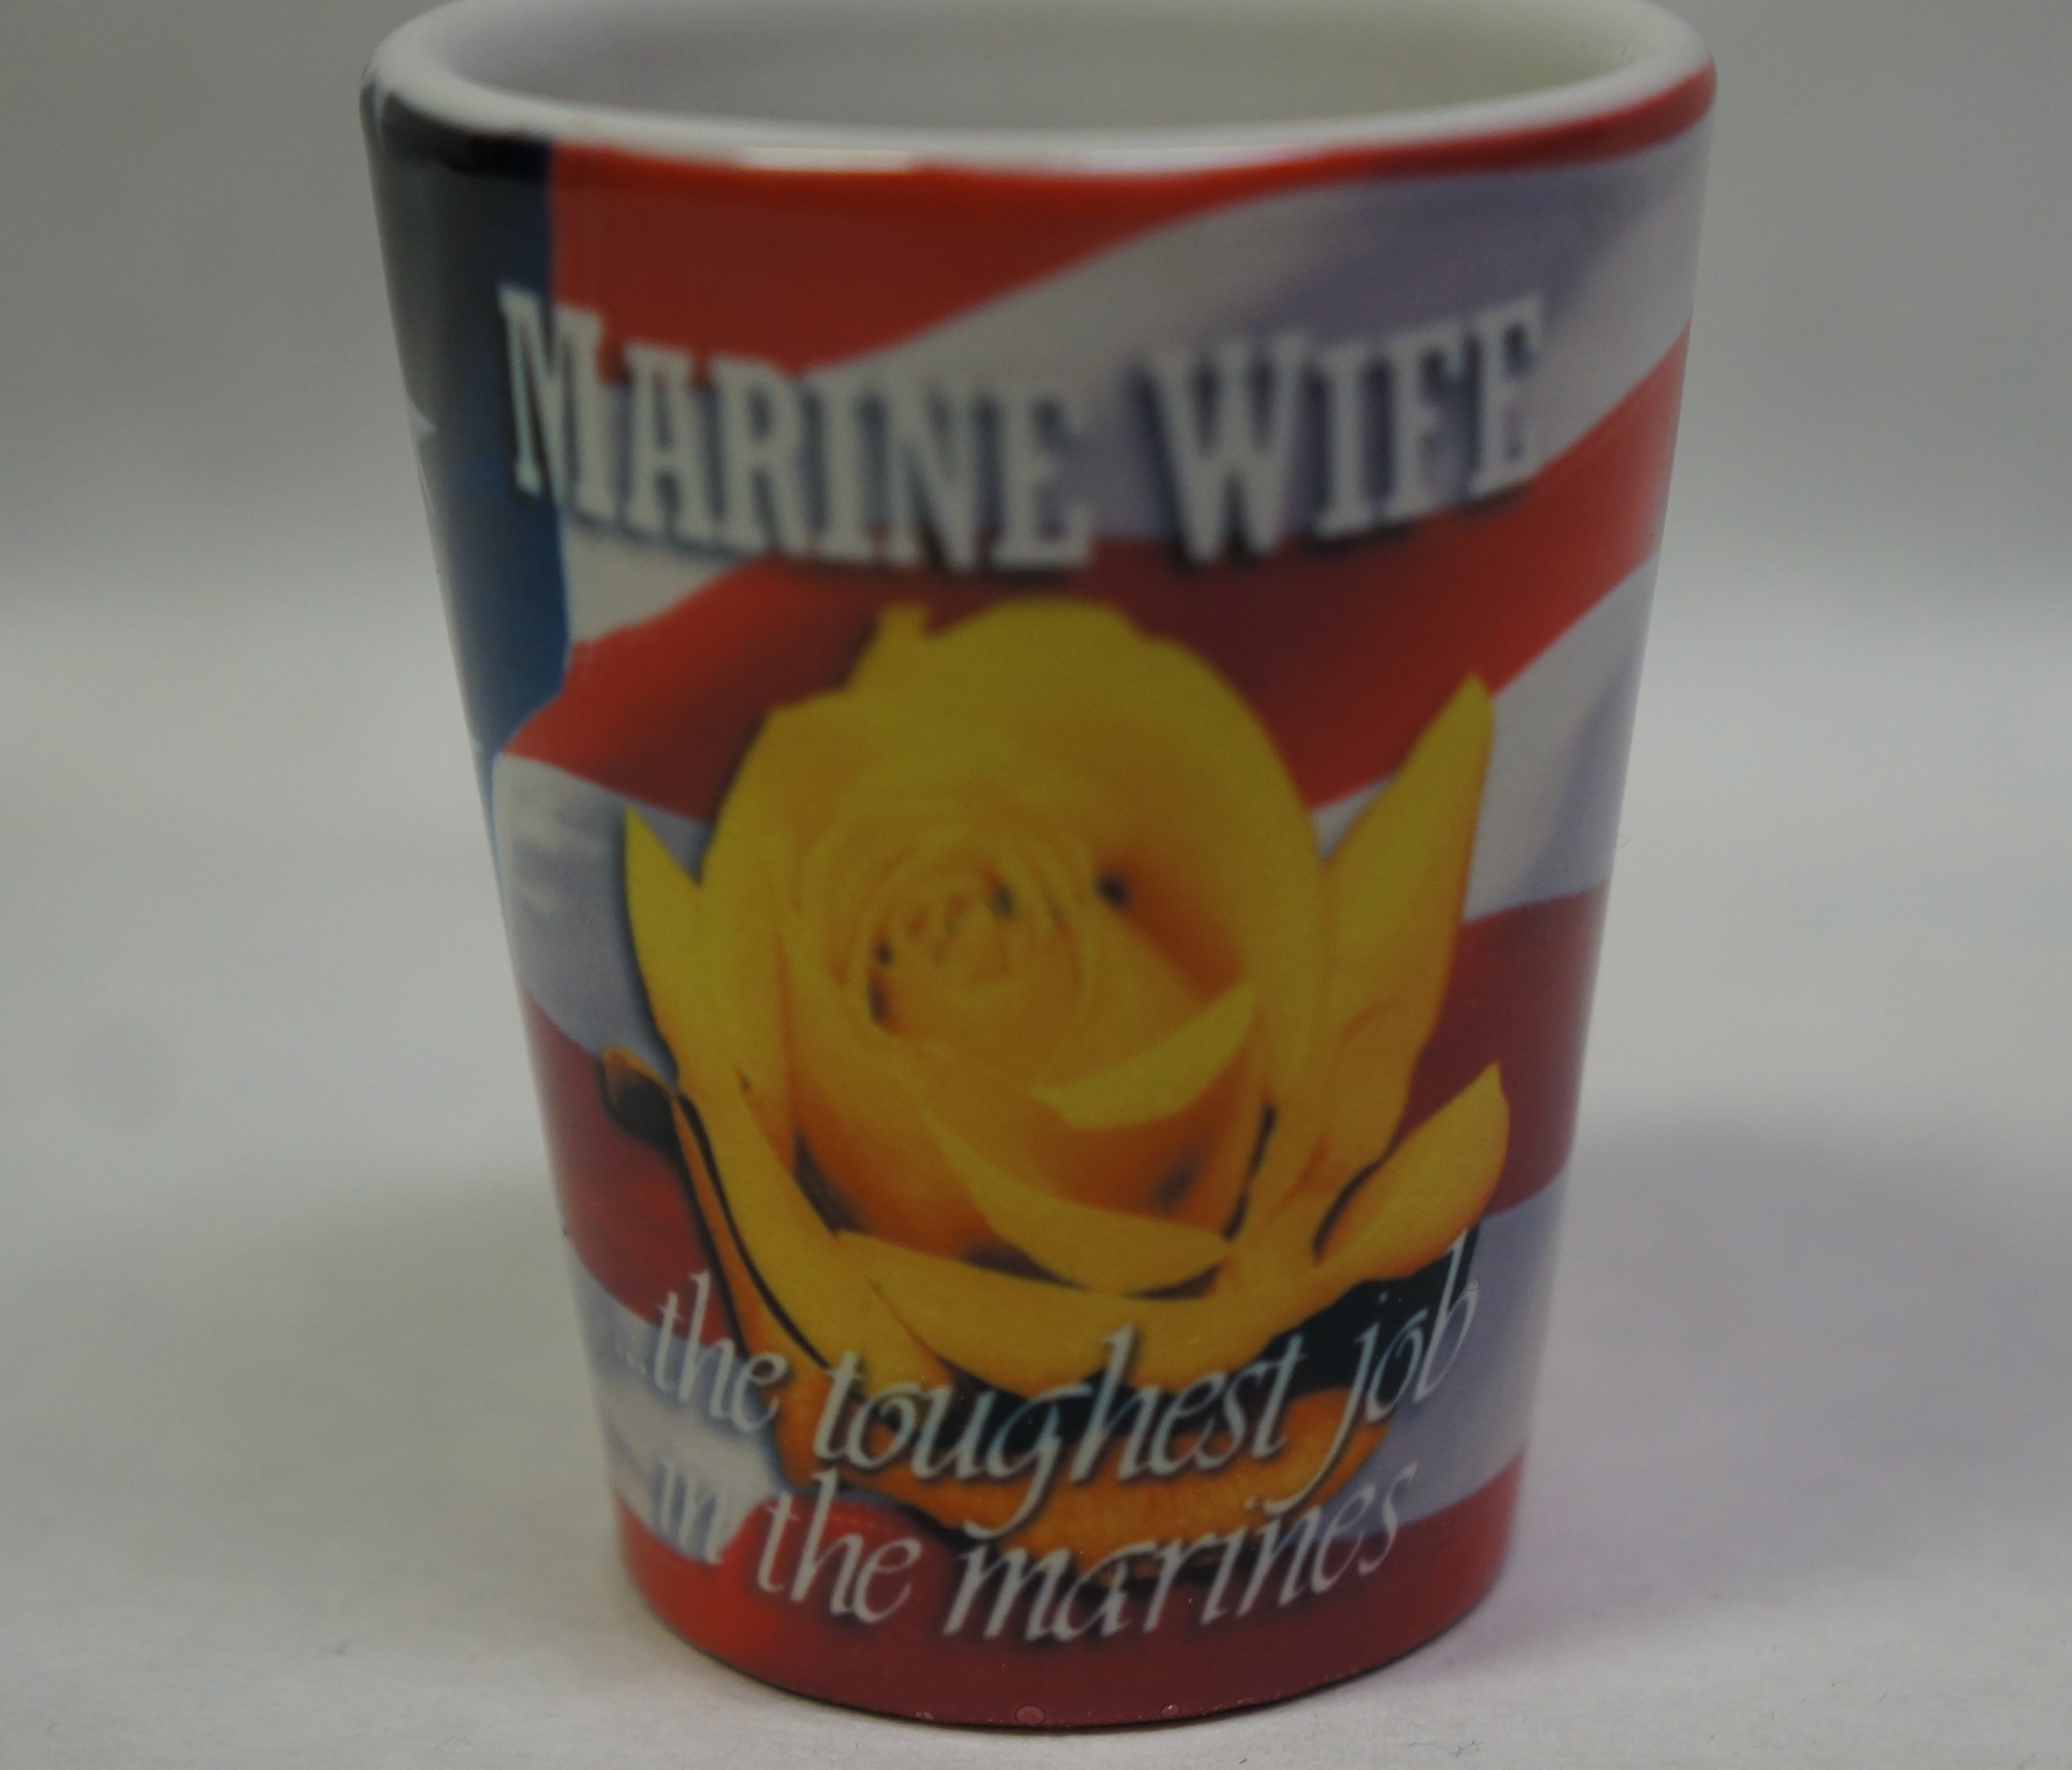 SHOT GLASS-Marine Wife, Toughest Job in the Corps